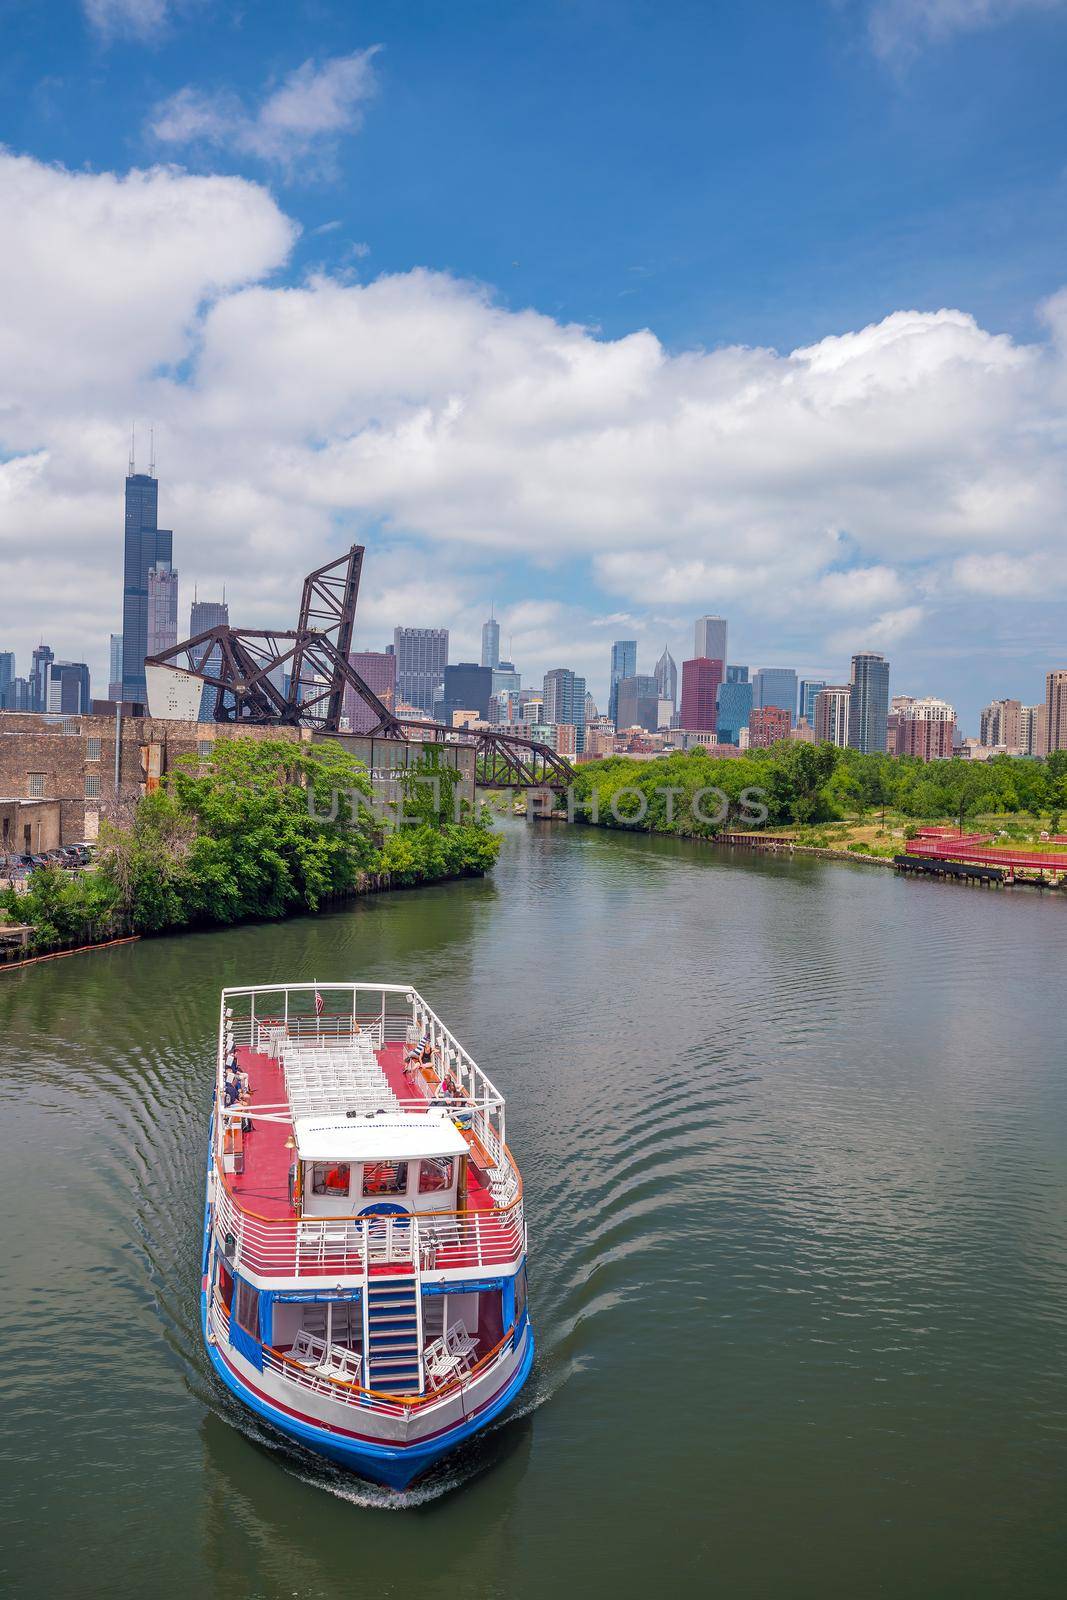 The Chicago River and downtown Chicago skyline USA
